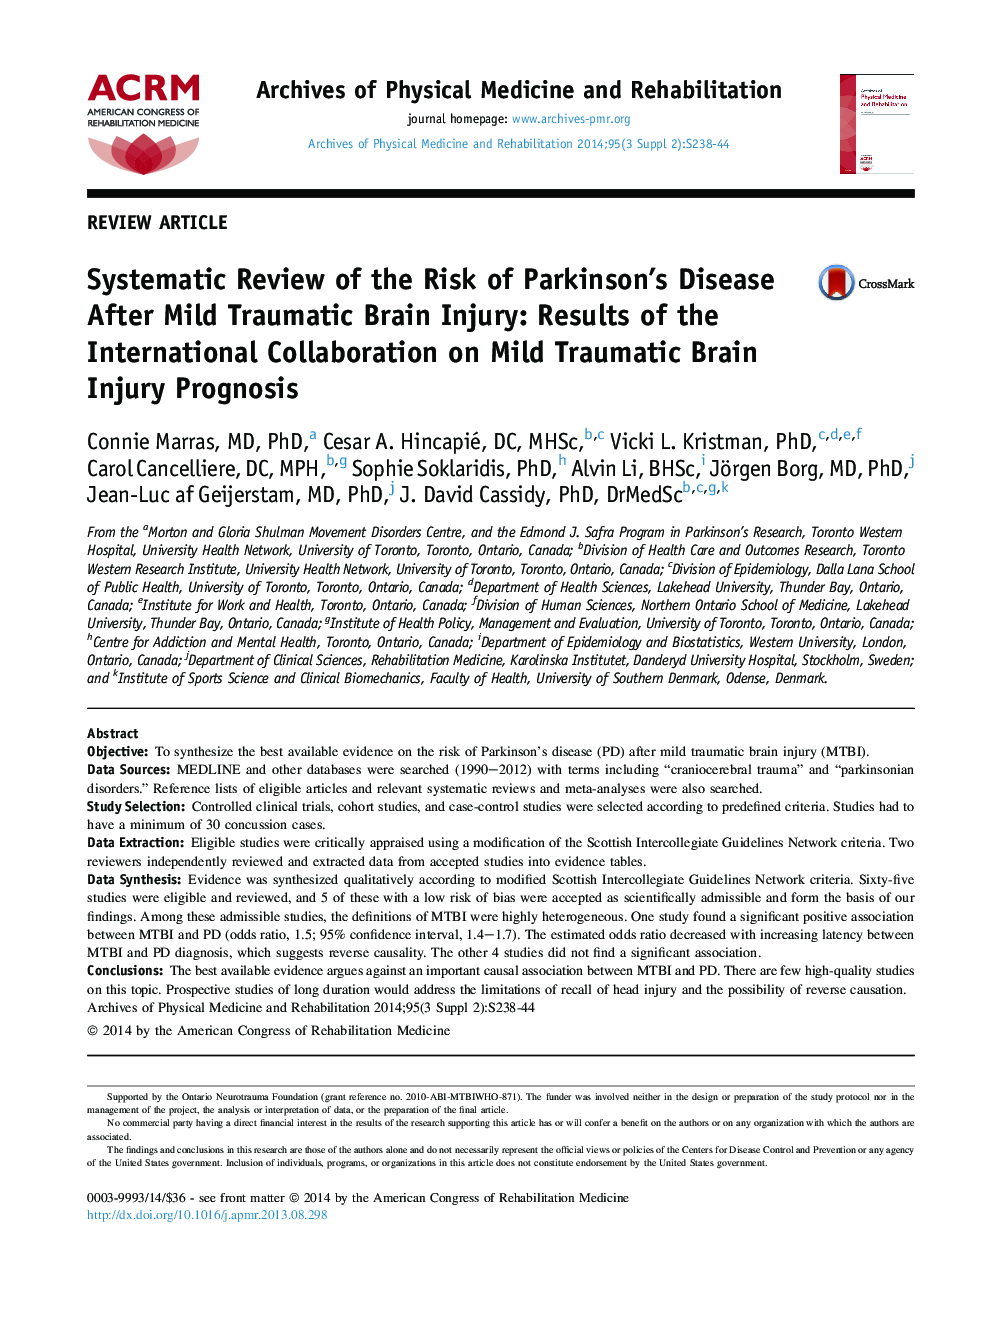 Systematic Review of the Risk of Parkinson's Disease After Mild Traumatic Brain Injury: Results of the International Collaboration on Mild Traumatic Brain Injury Prognosis 